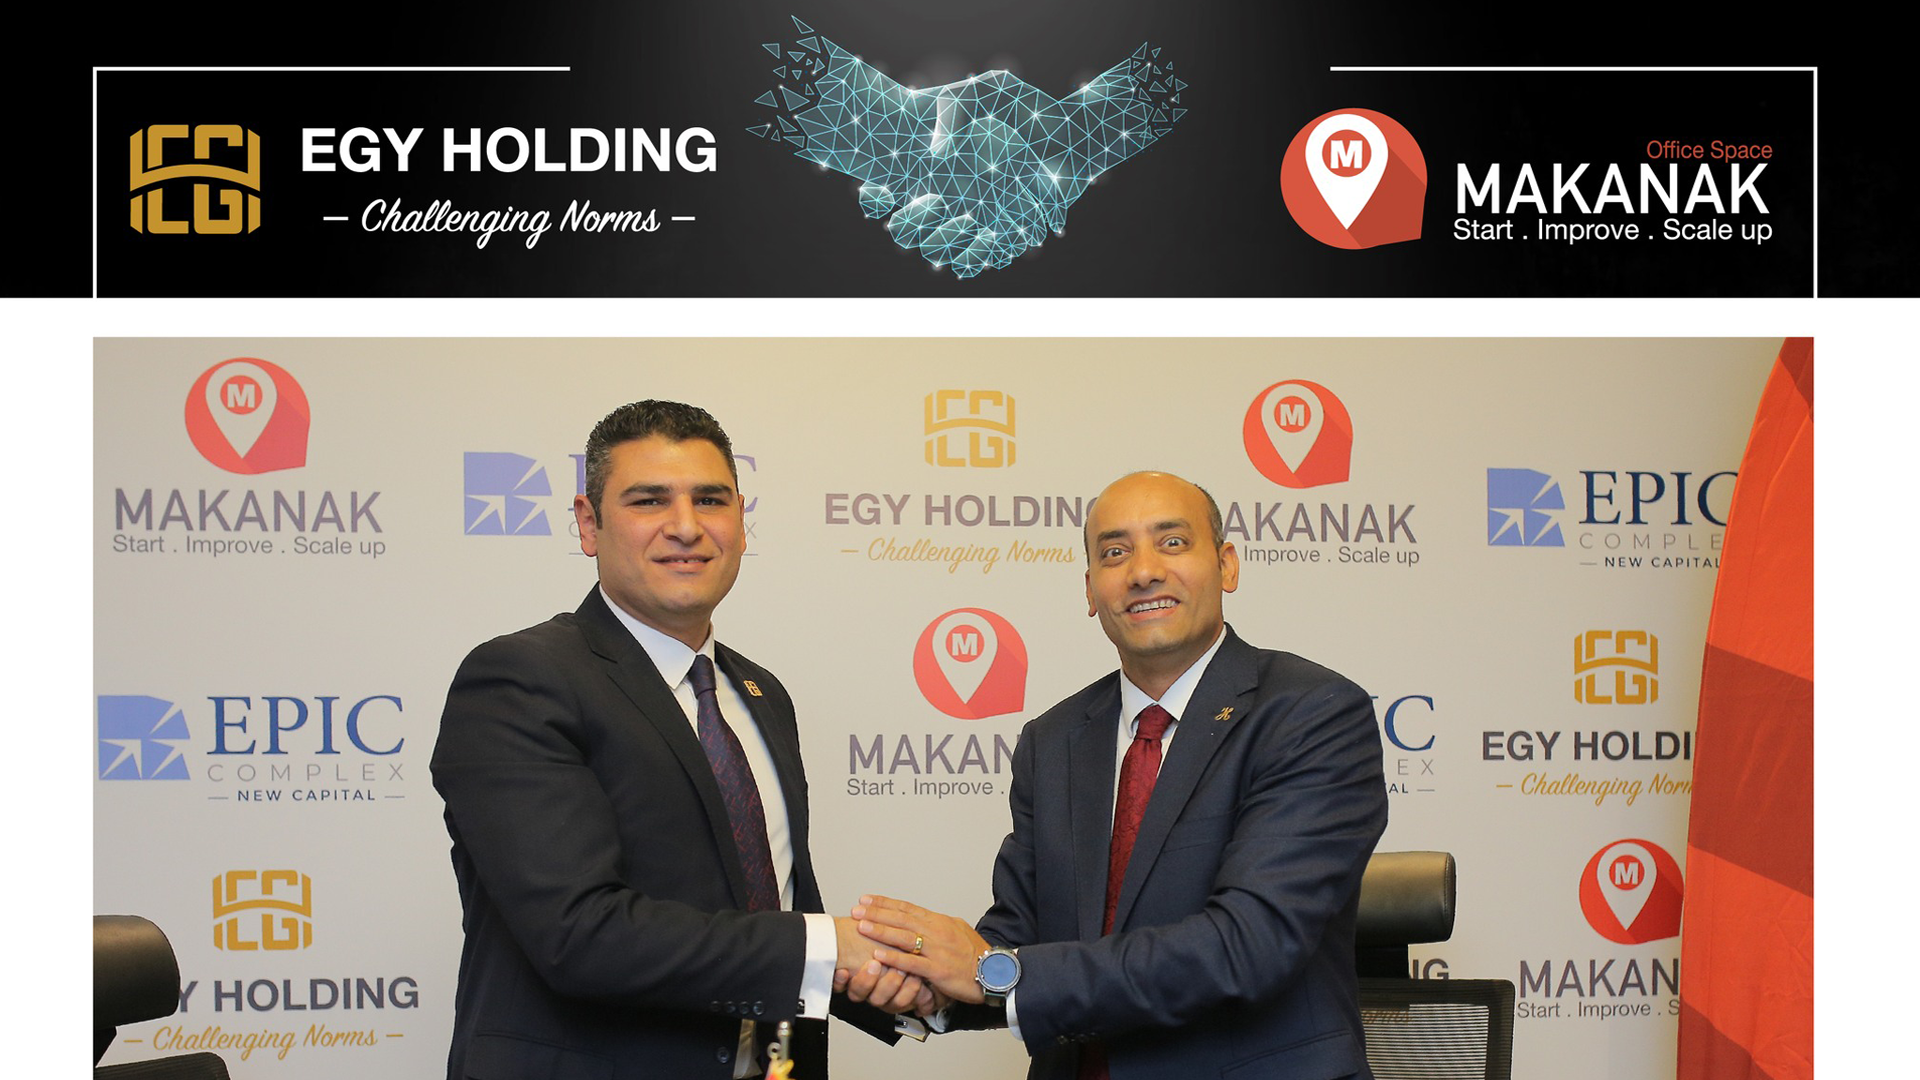 Partnership Agreement between Makanak and Egy Holding for Managing Epic Complex Building in the New Administrative Capital